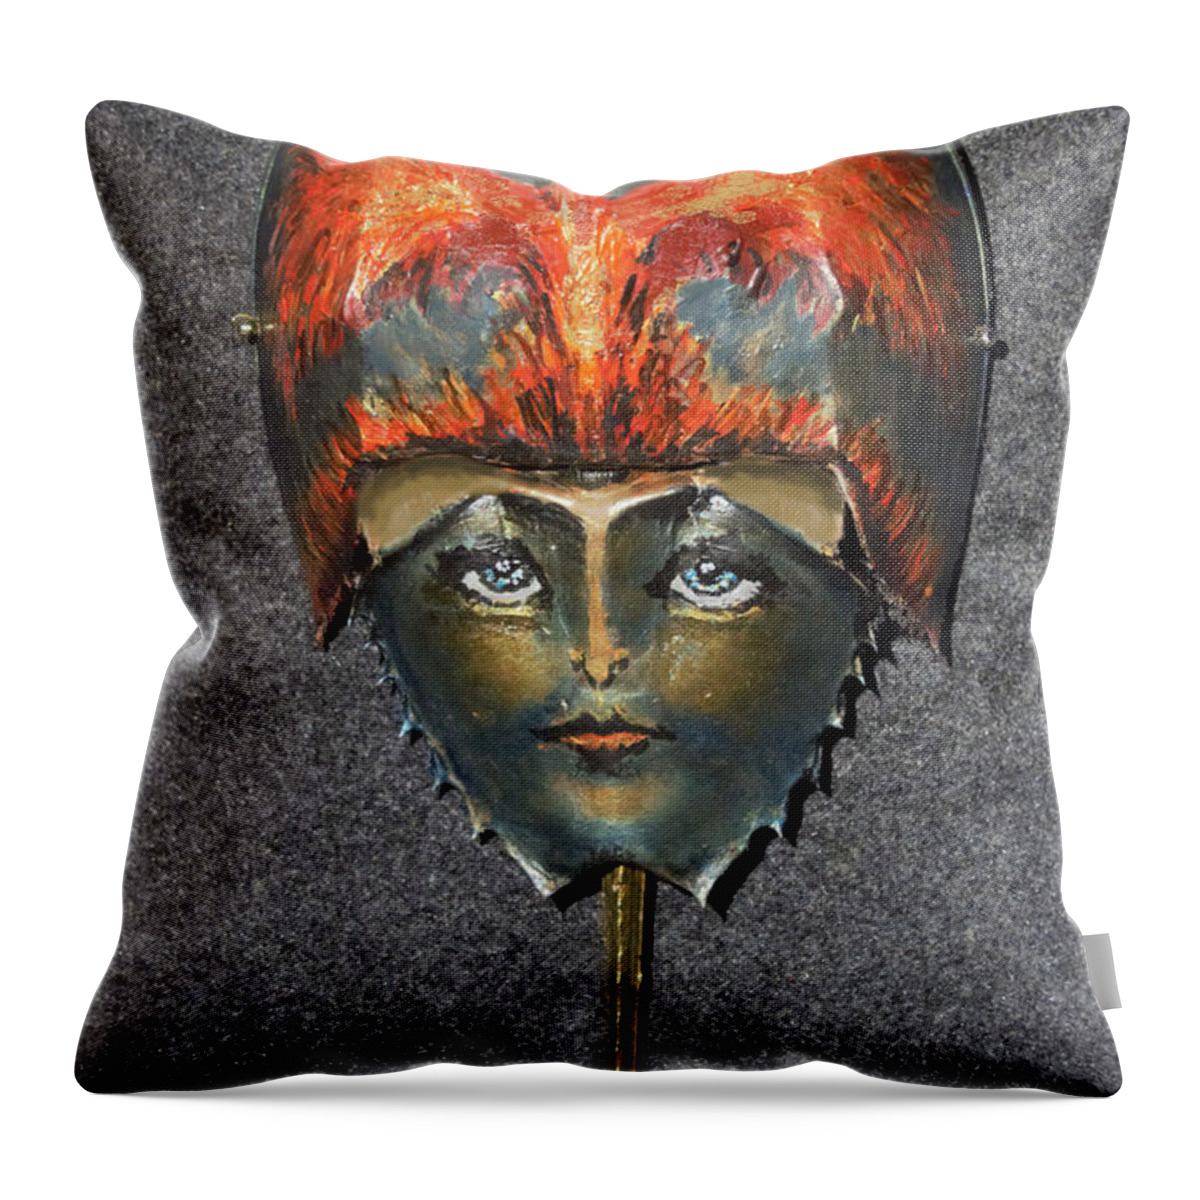  Throw Pillow featuring the painting Phoenix Helmeted Warrior Princess by Roger Swezey